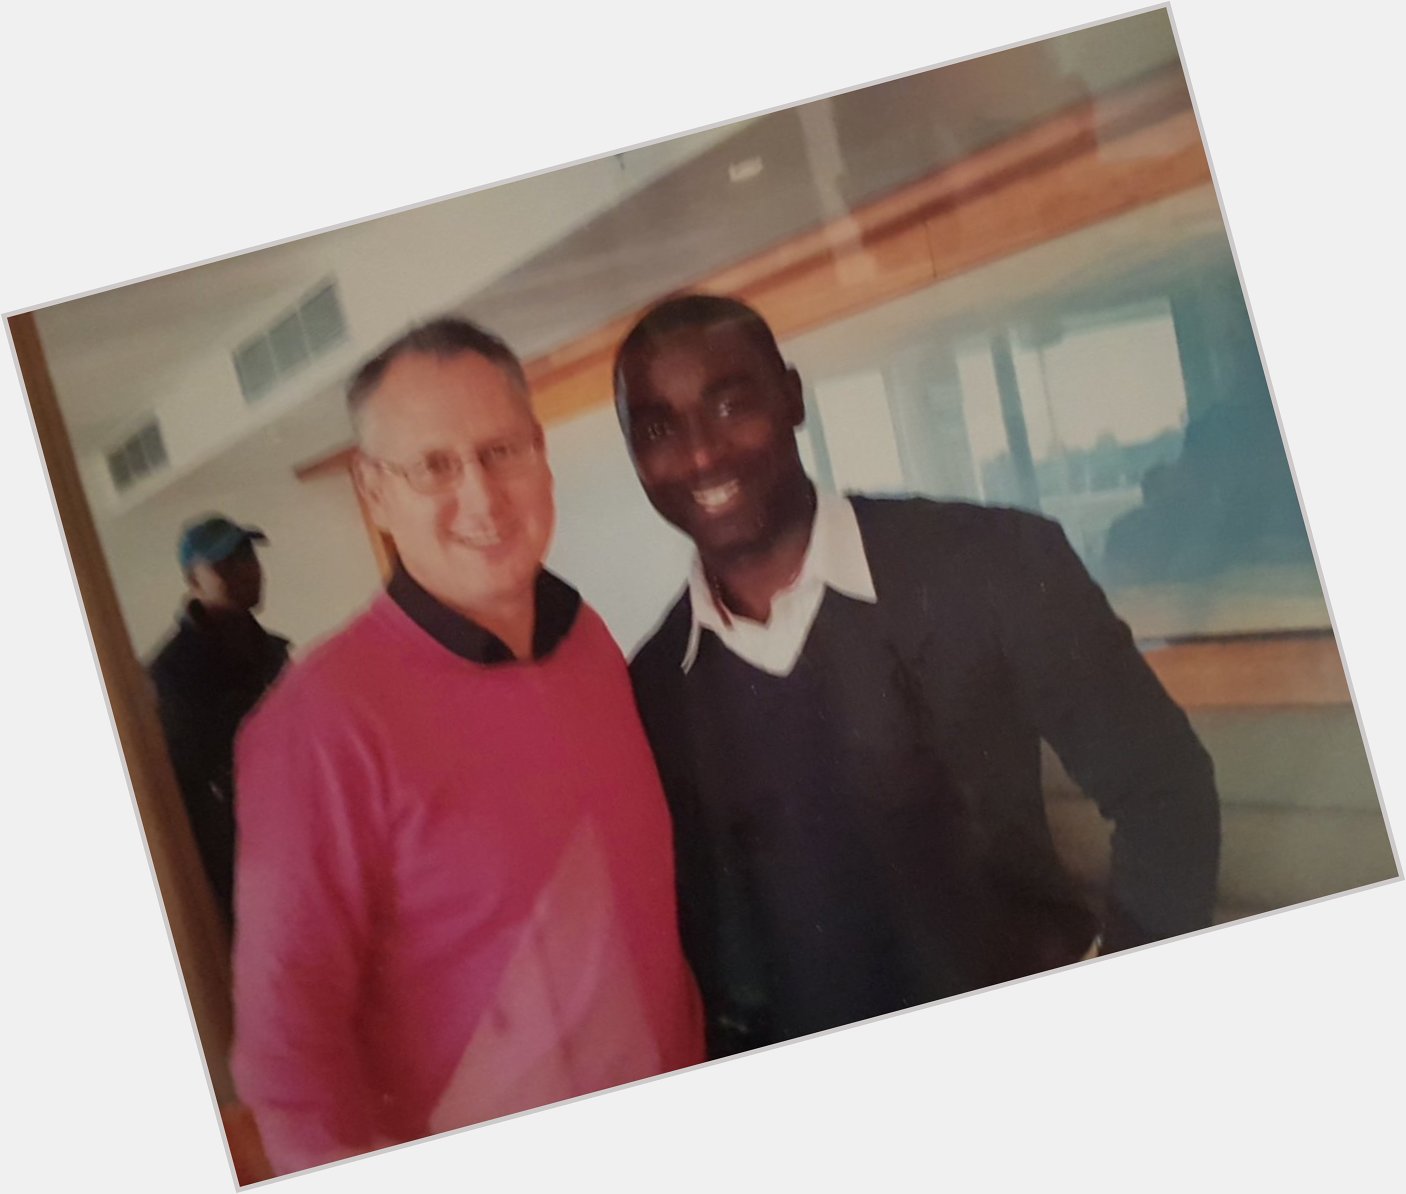   Happy Birthday Andy Andy Cole he scores goals enjoy the day   